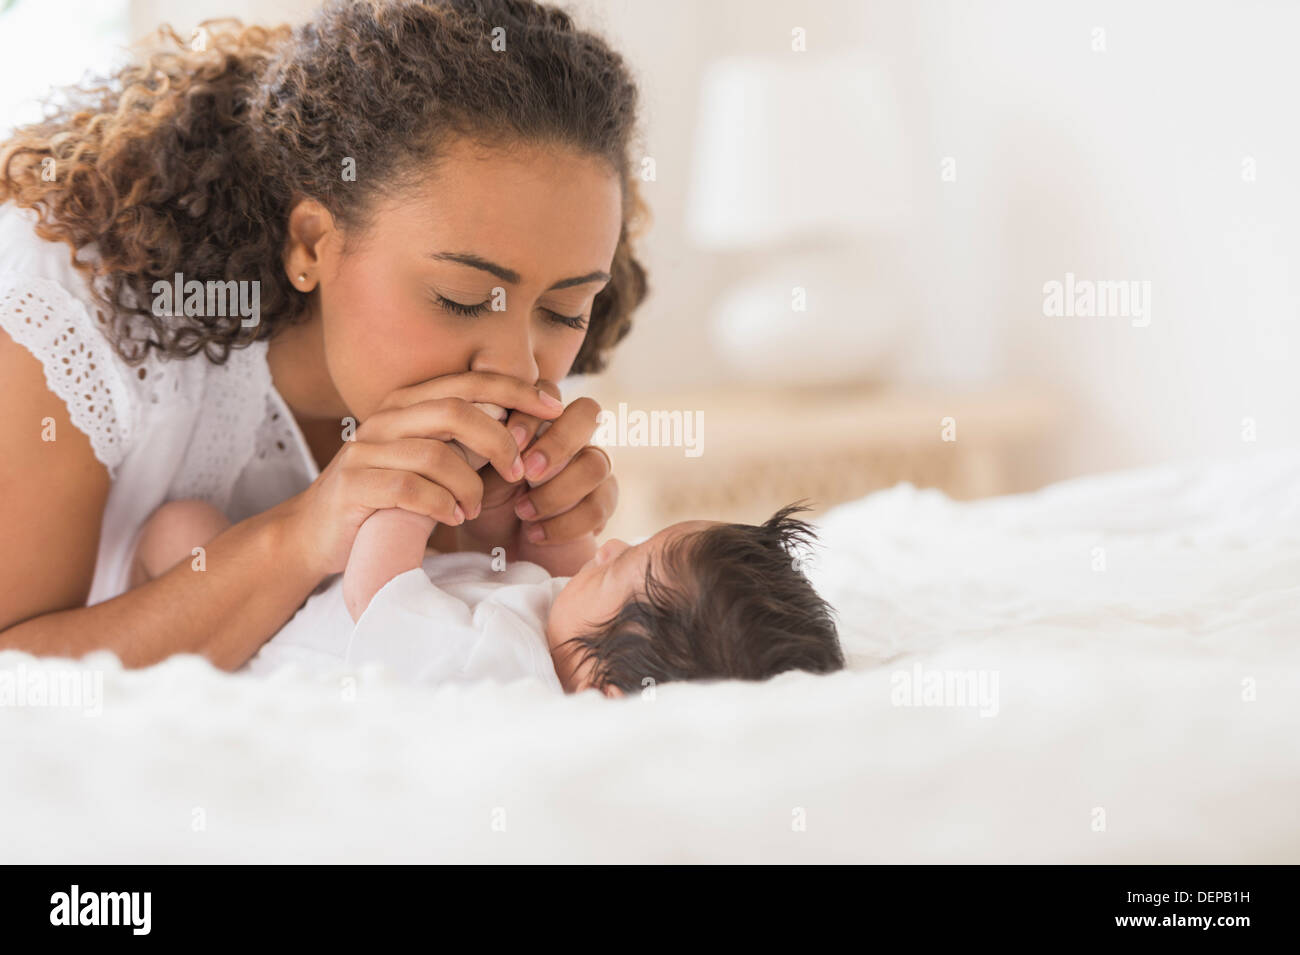 Hispanic mother playing with infant on bed Stock Photo